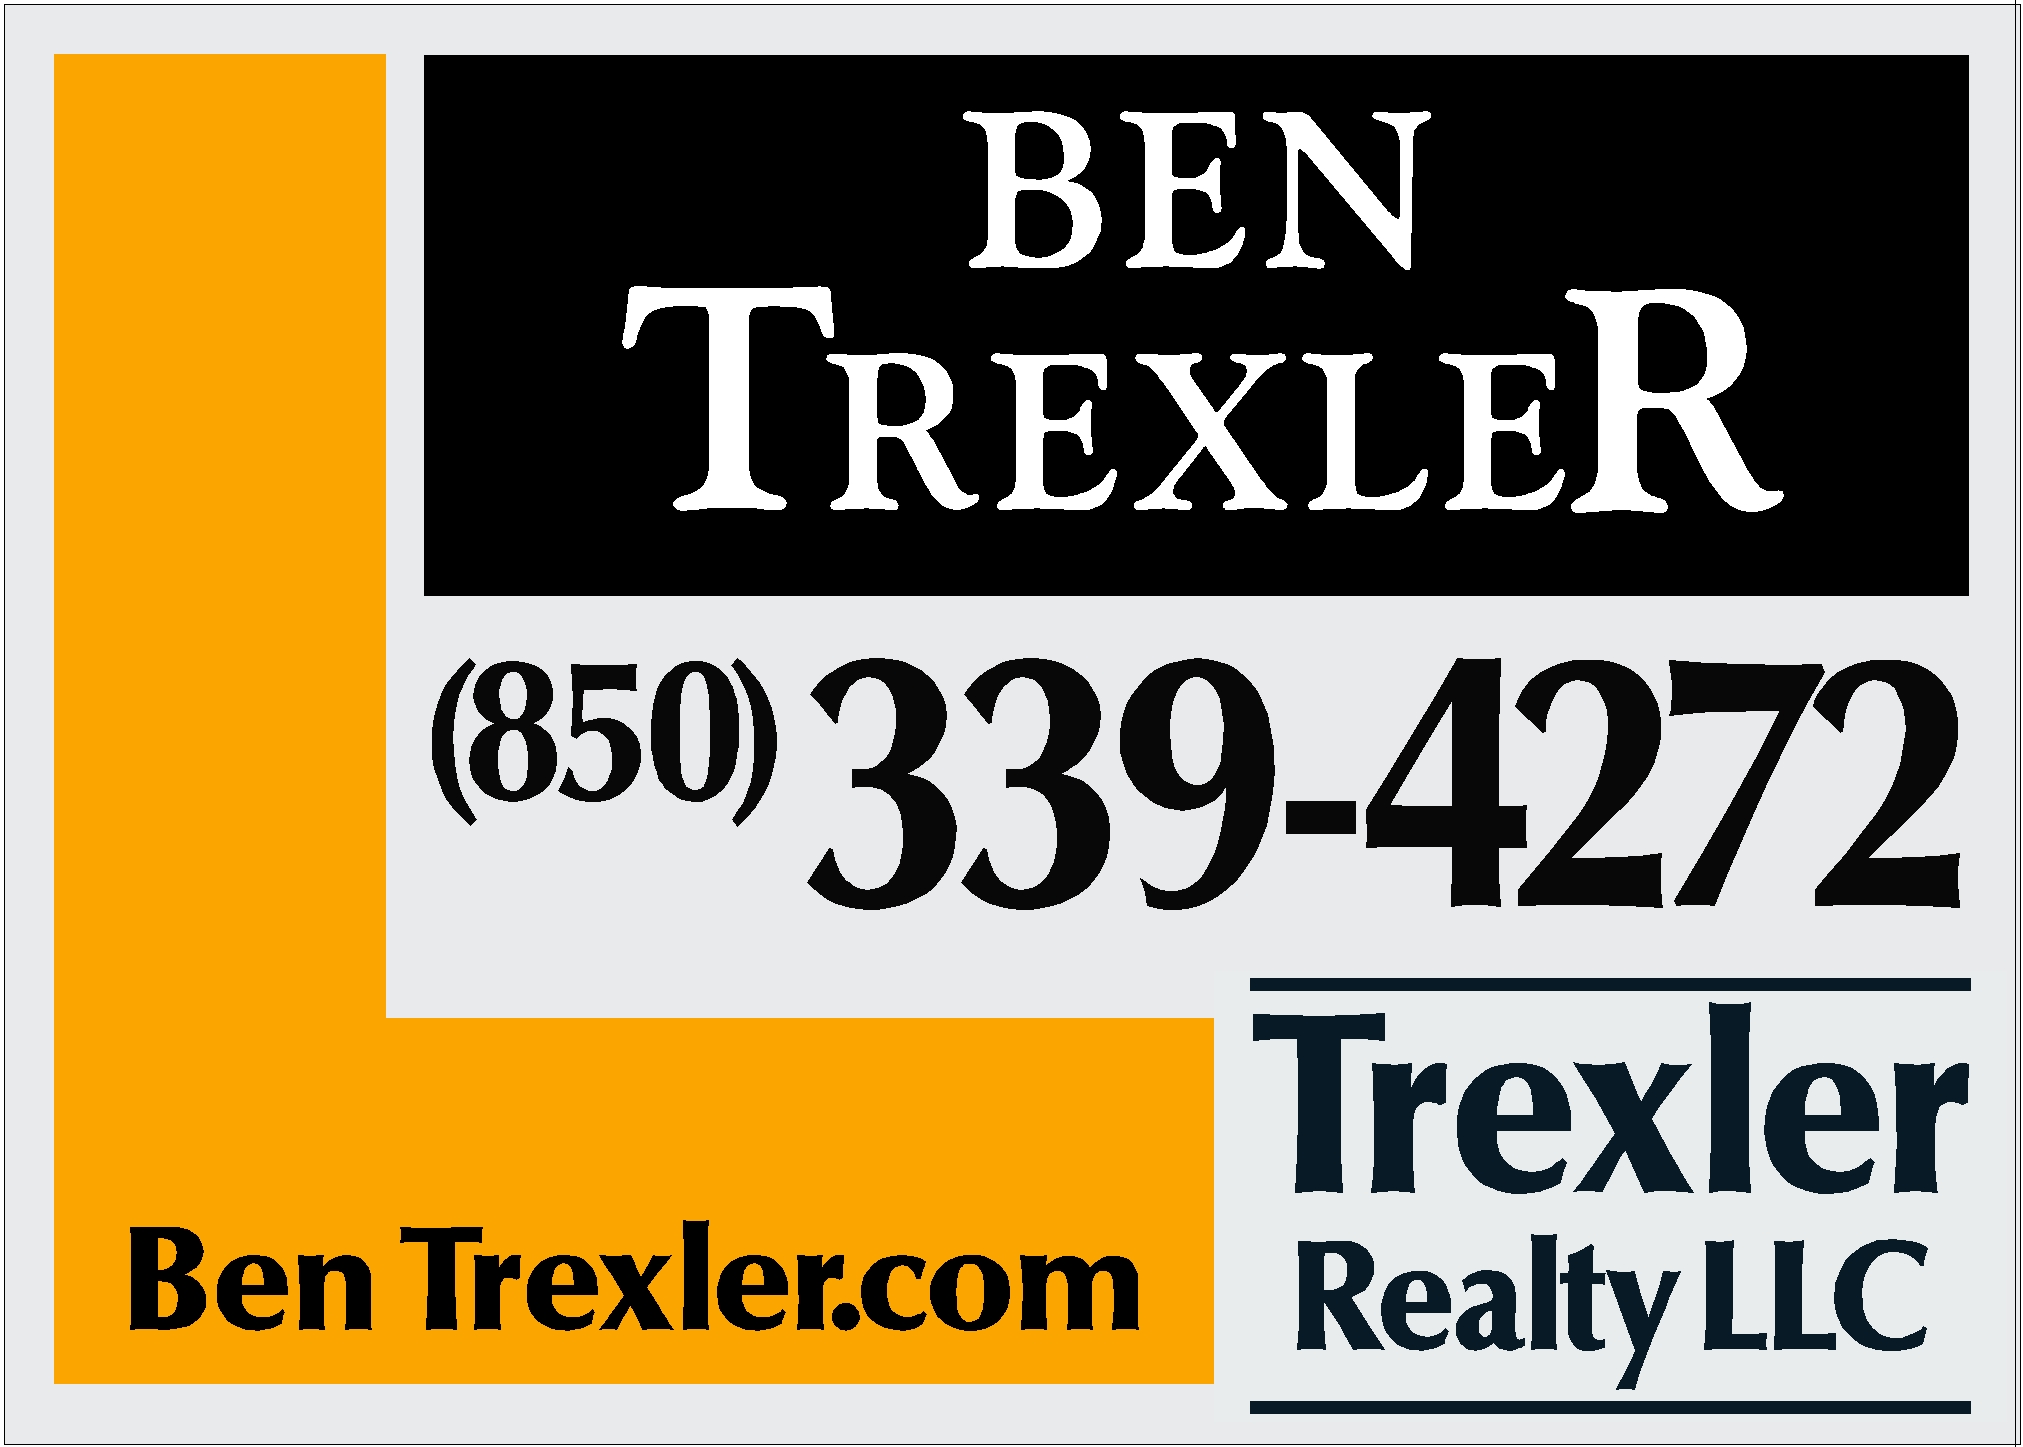 M. Trexler Realty (Supporting)